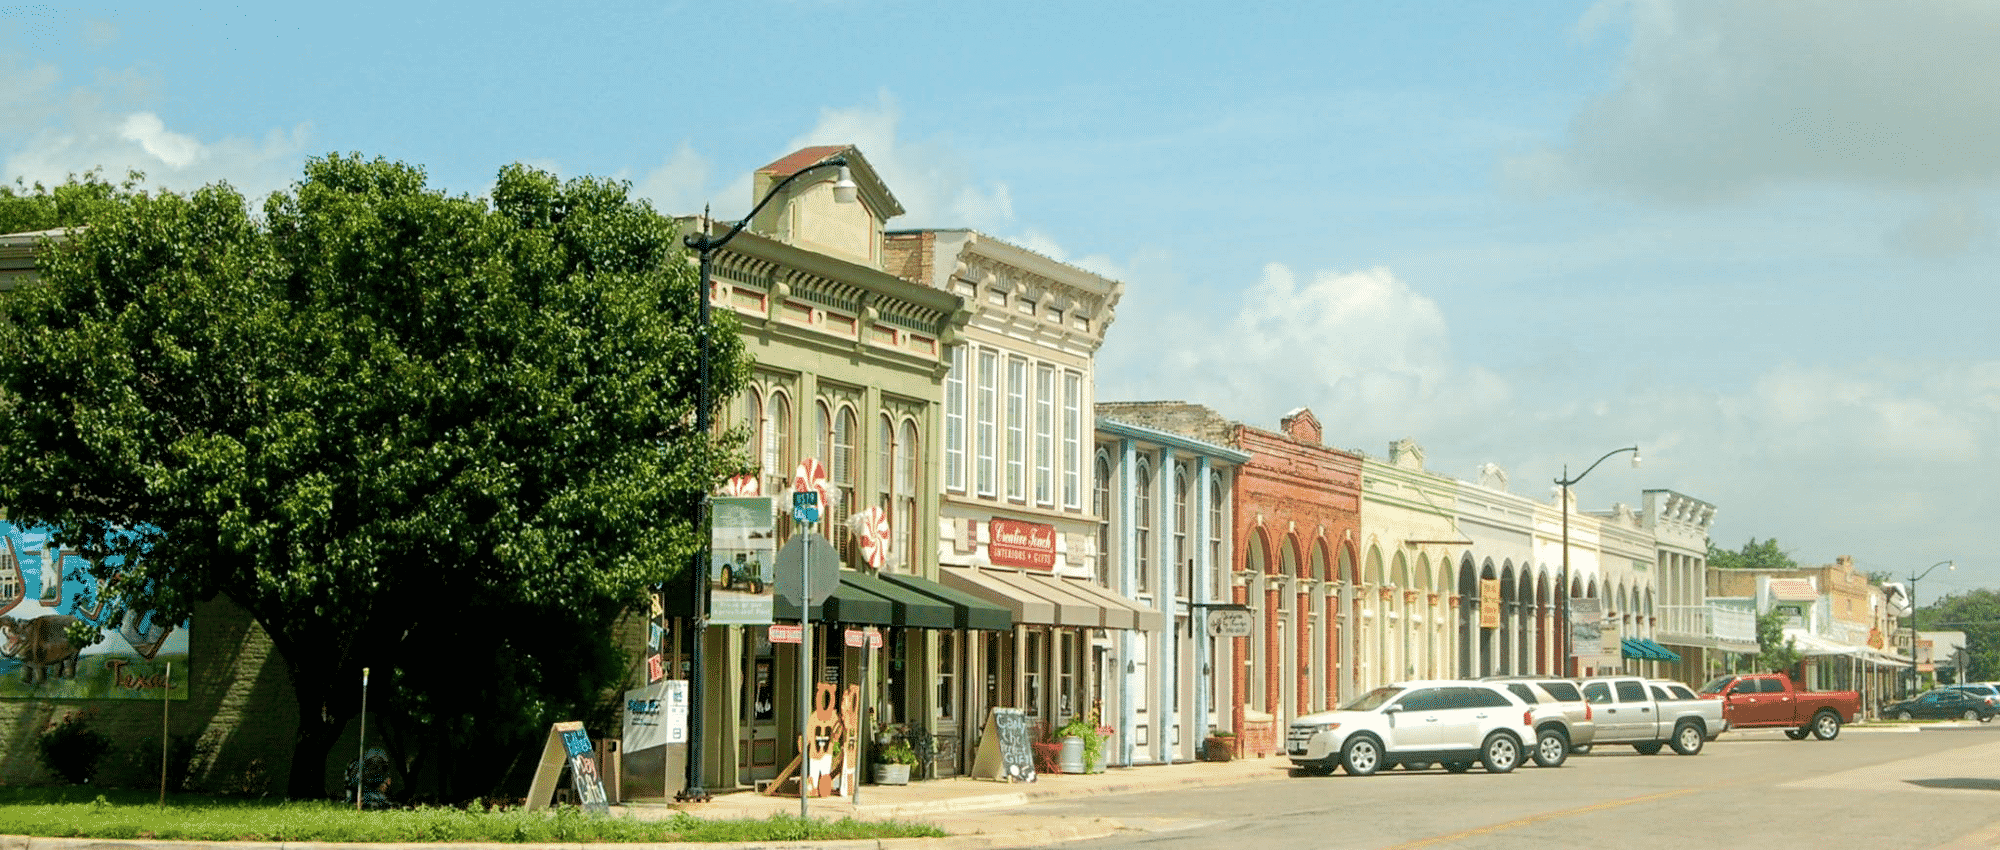 Your Guide to Hutto, Texas Austin’s Newest Northeast Neighbor